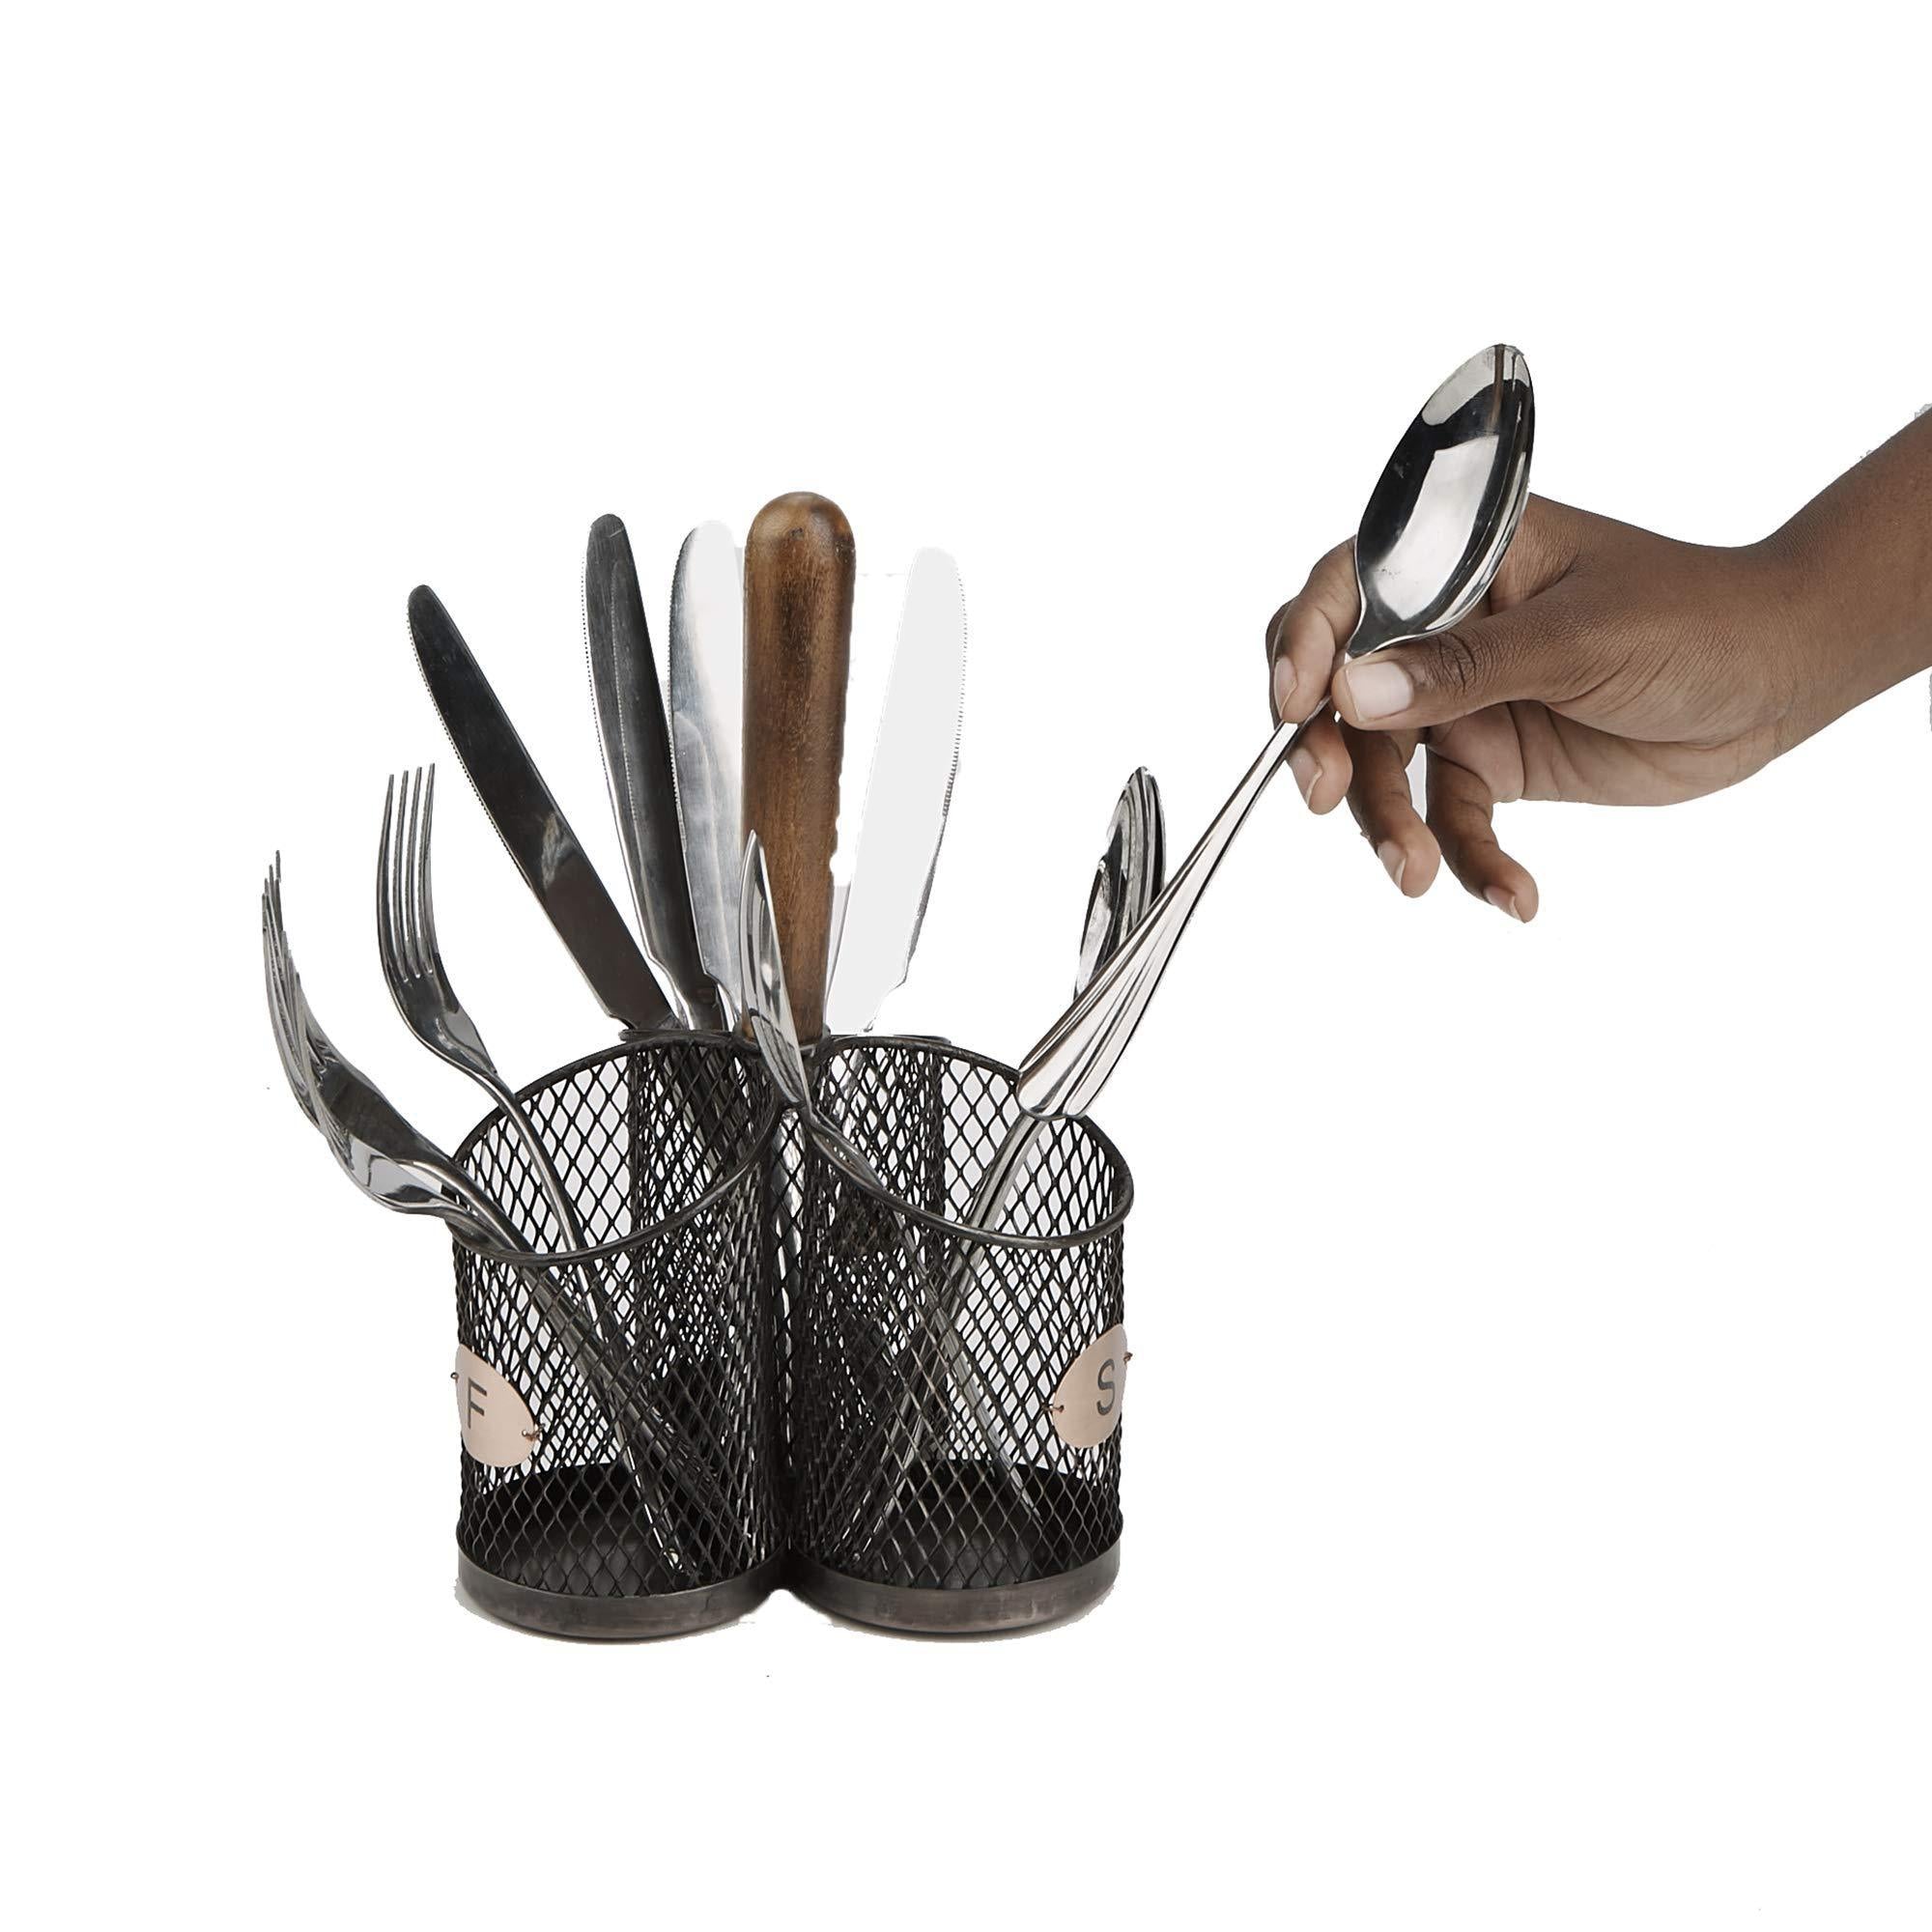 Kitchen mind reader 3wcadut brn wood 3 section utensil caddy cutlery holder flatware silverware organizer forks spoons knives dining table countertops kitchen brown one size black mesh